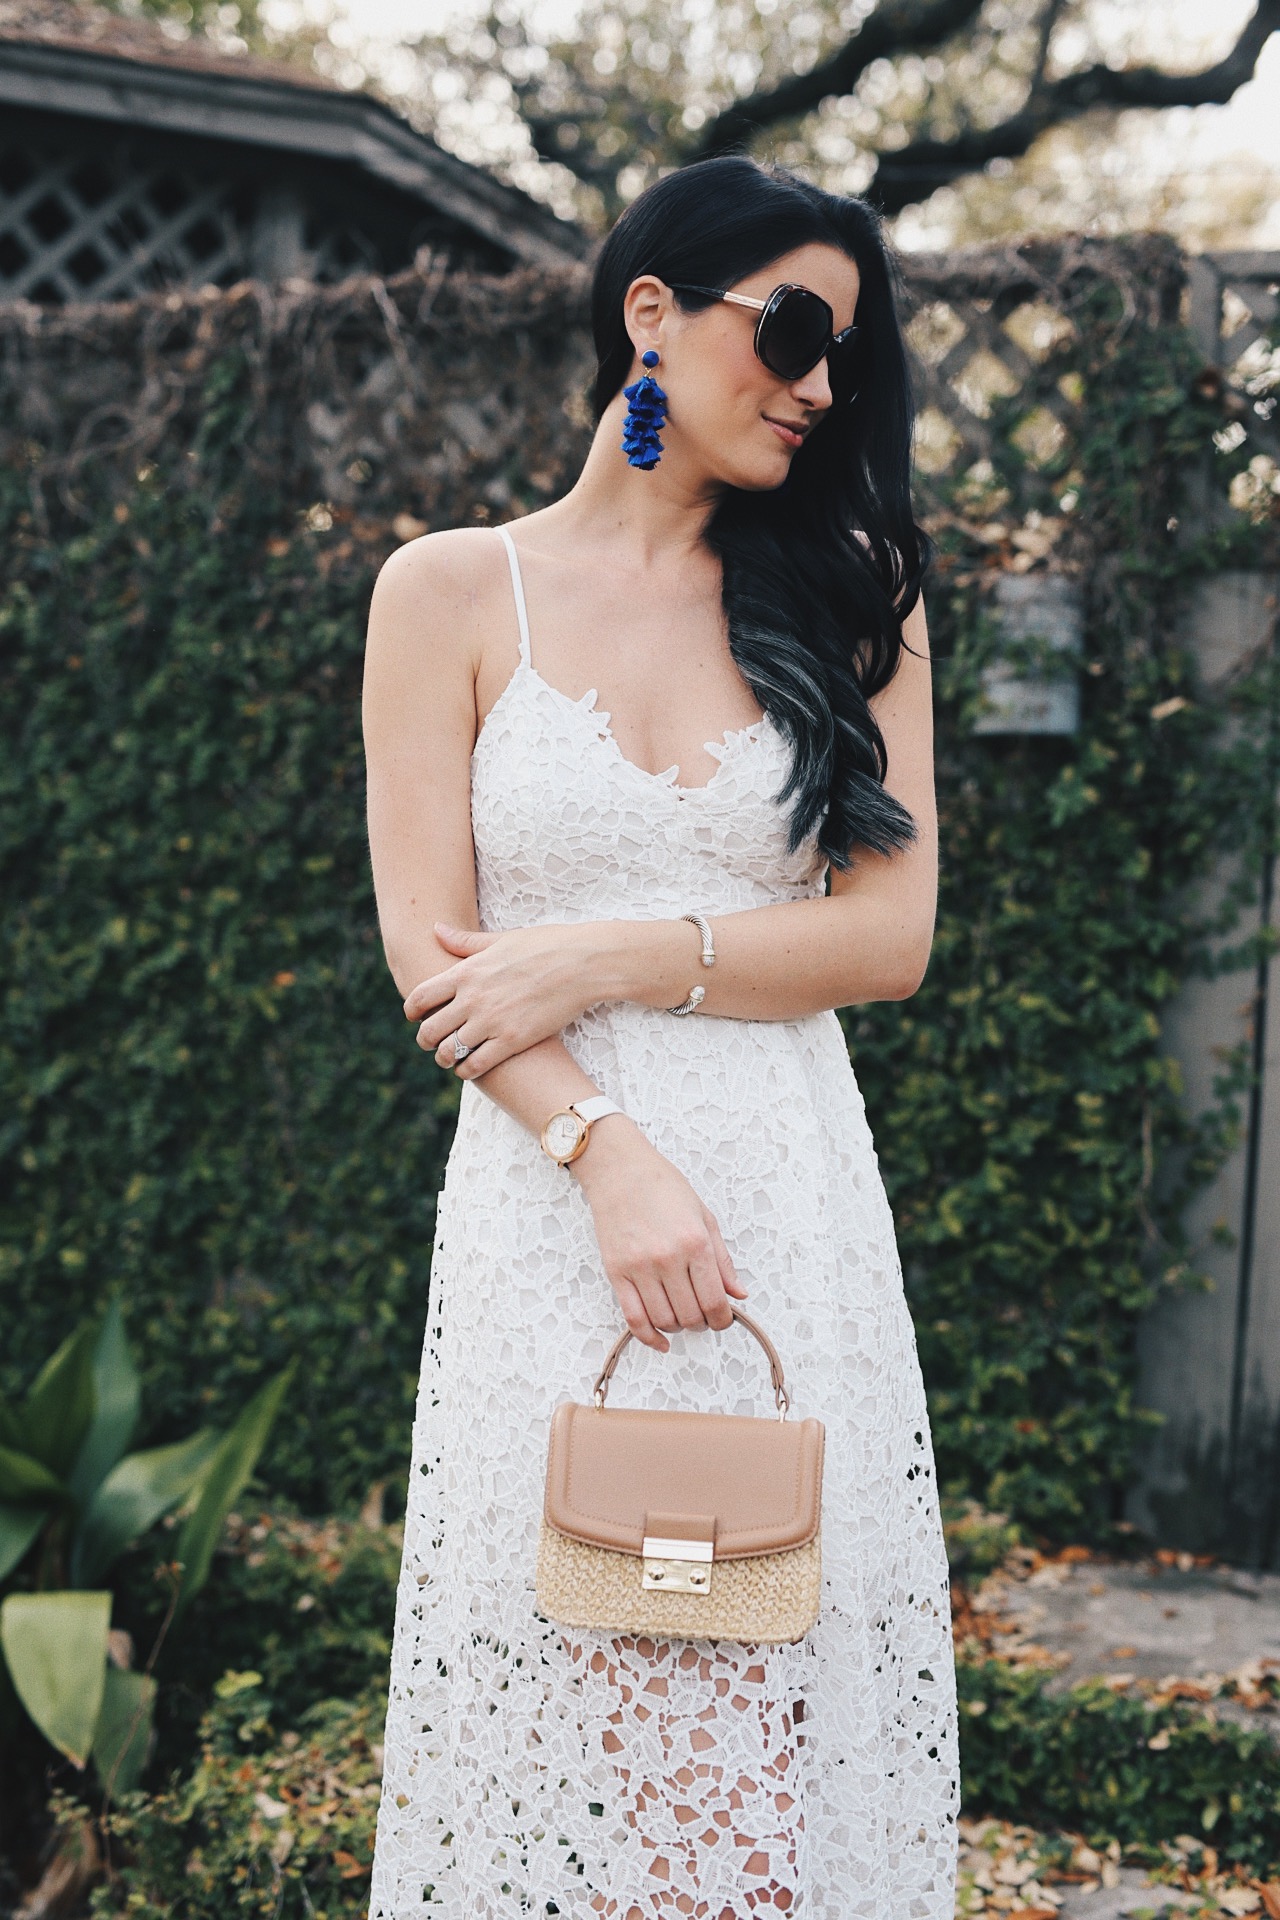 Cute Easter Dresses featured by top US fashion blog Dressed to Kill; Image of a woman wearing ASTR dress, Steve Madden shoes, H&M handbag, Marc Jacobs watch, Baublebar earrings, David Yurman bracelet and Nordstrom sunglasses.